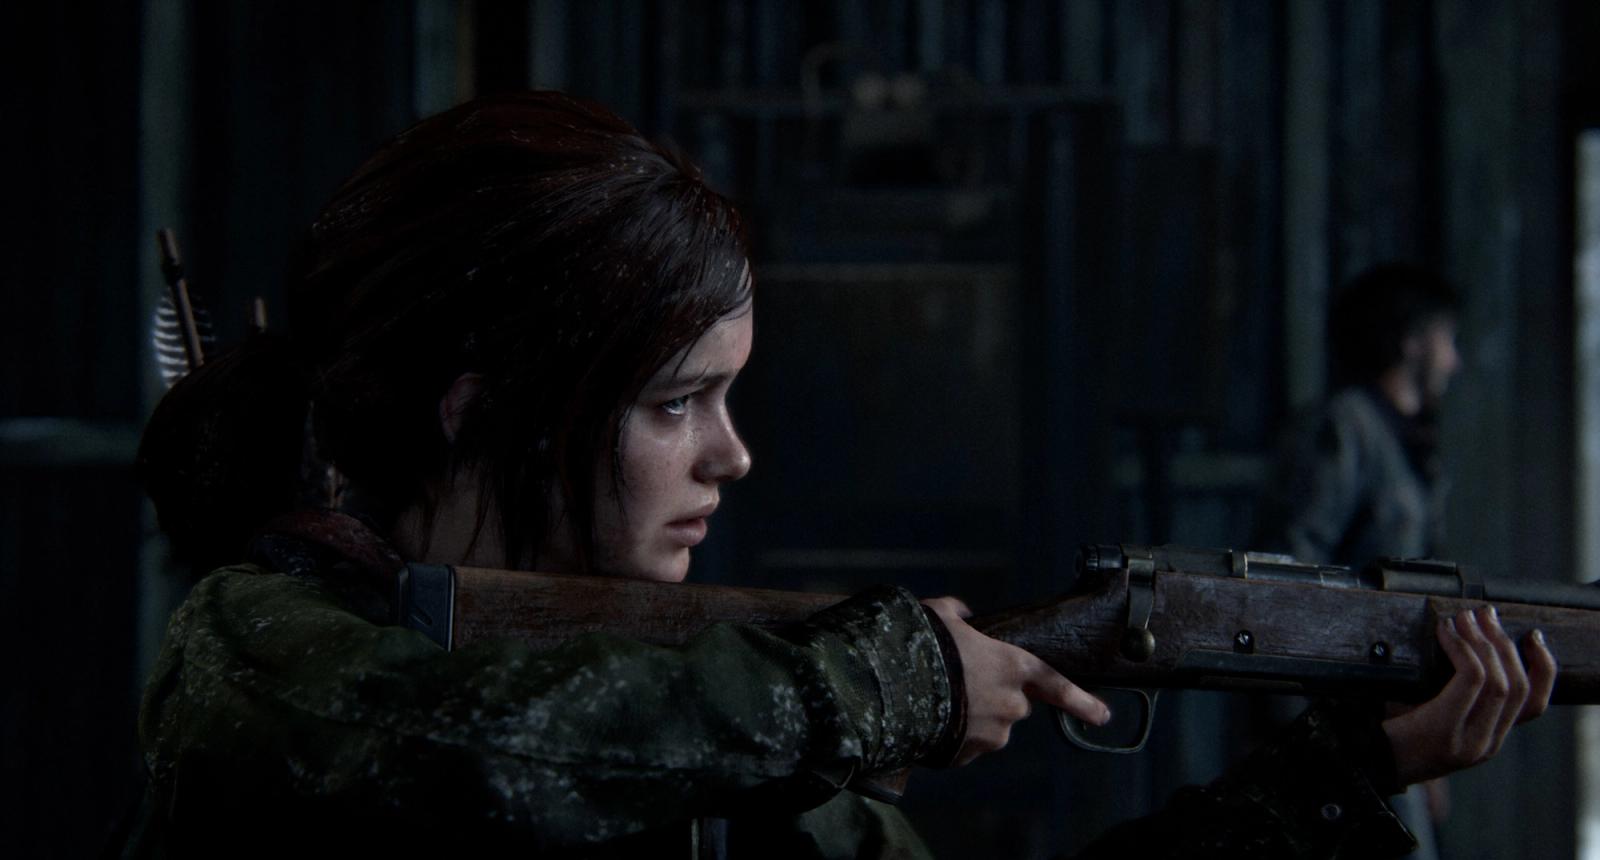 The Last of Us' Ellie aiming a rifle